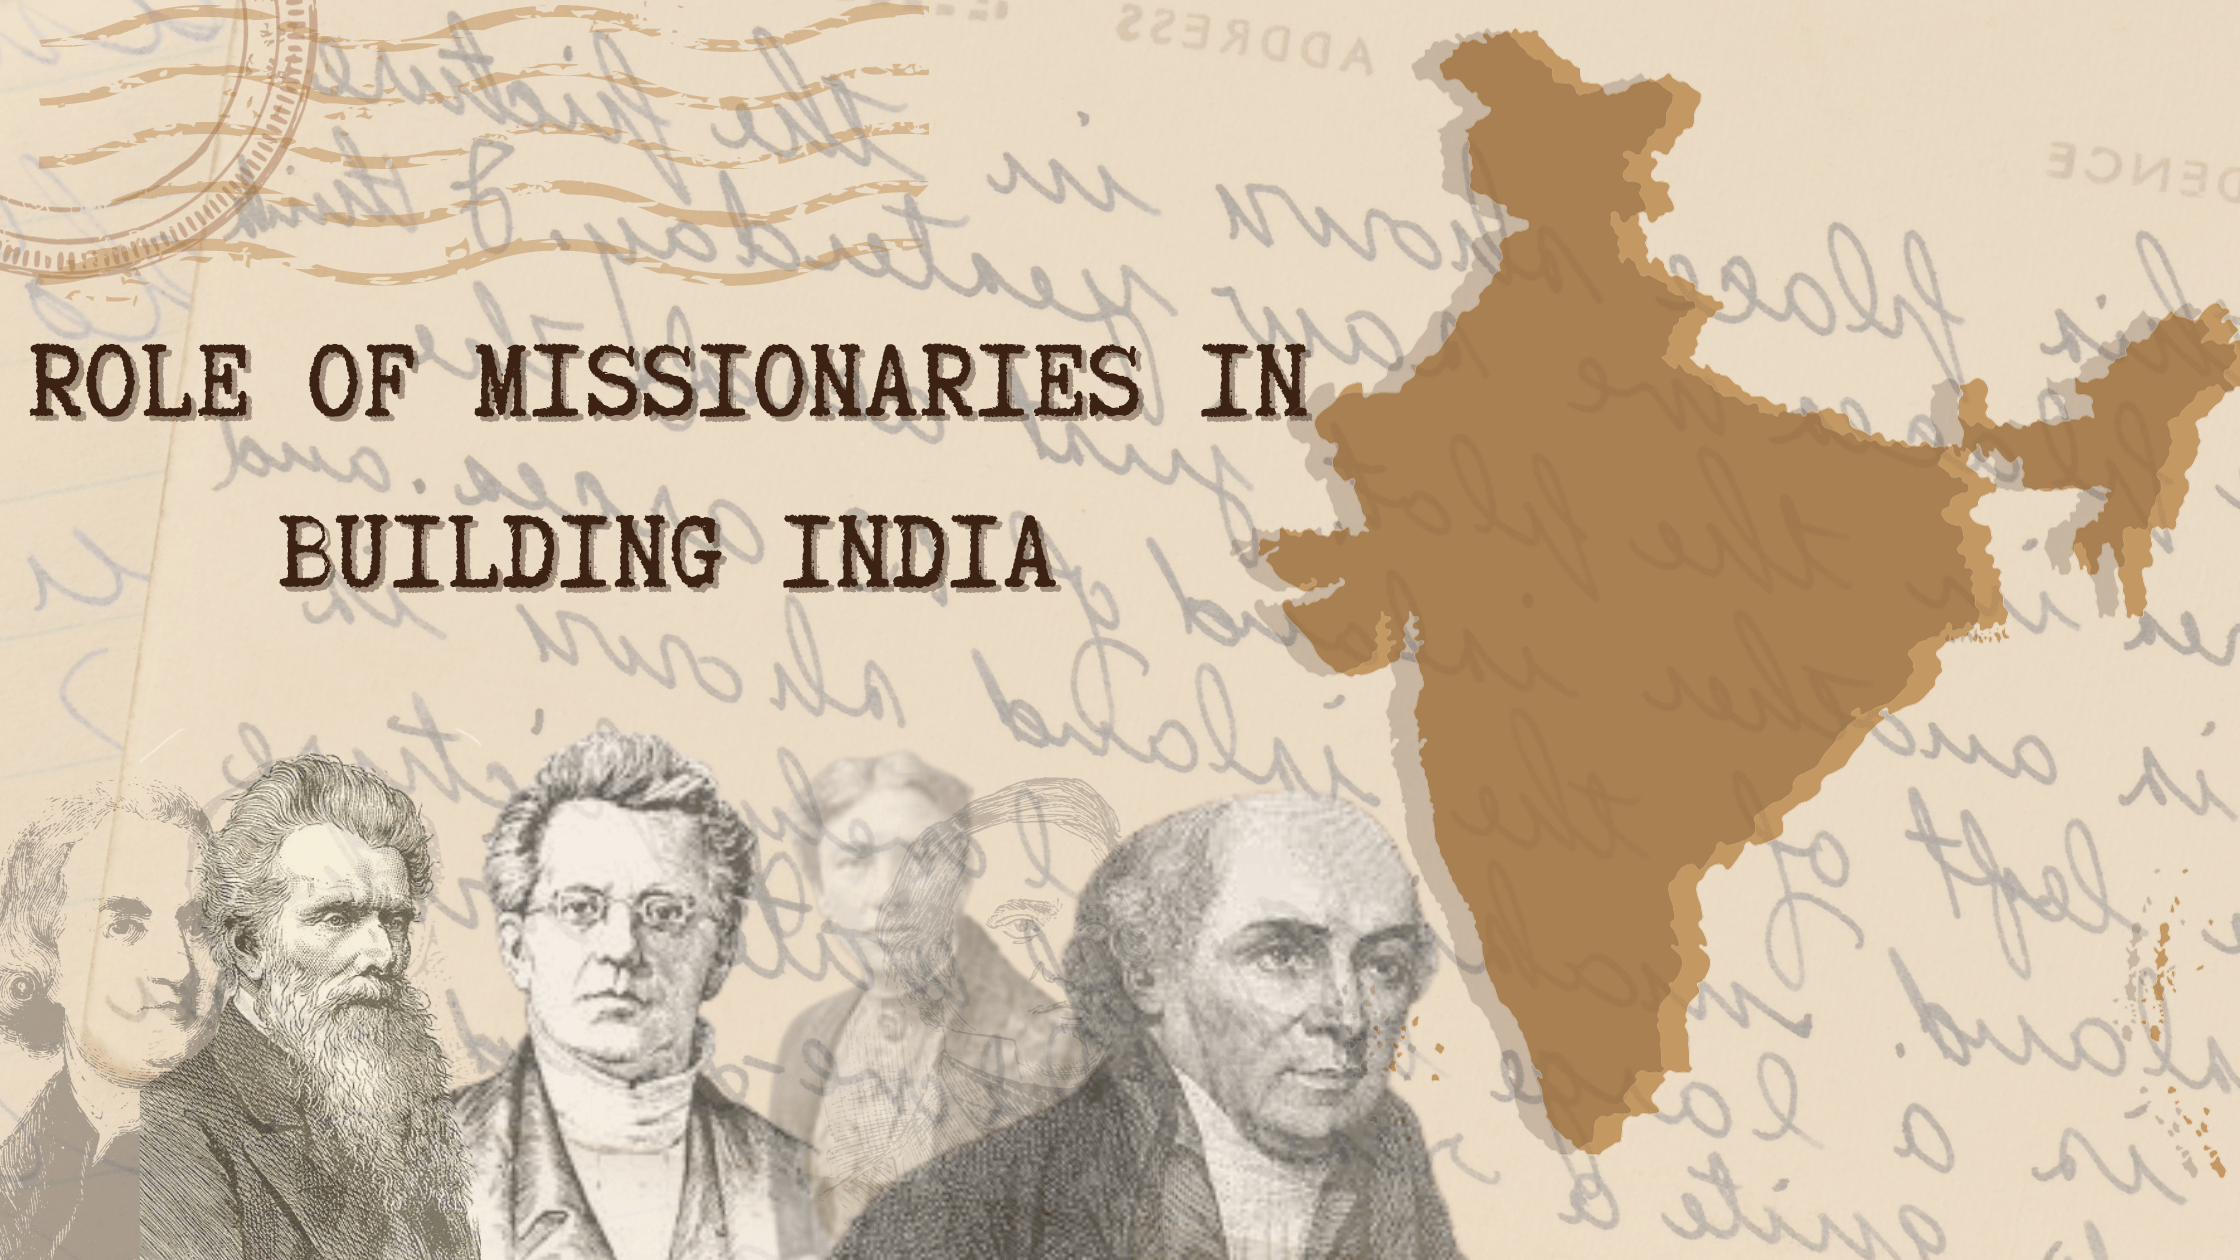 Vintage picture of various Missionaries who reformed India. Images of William Carey, John Scudder, Edith Mary Brown, Alexander Duff etc.